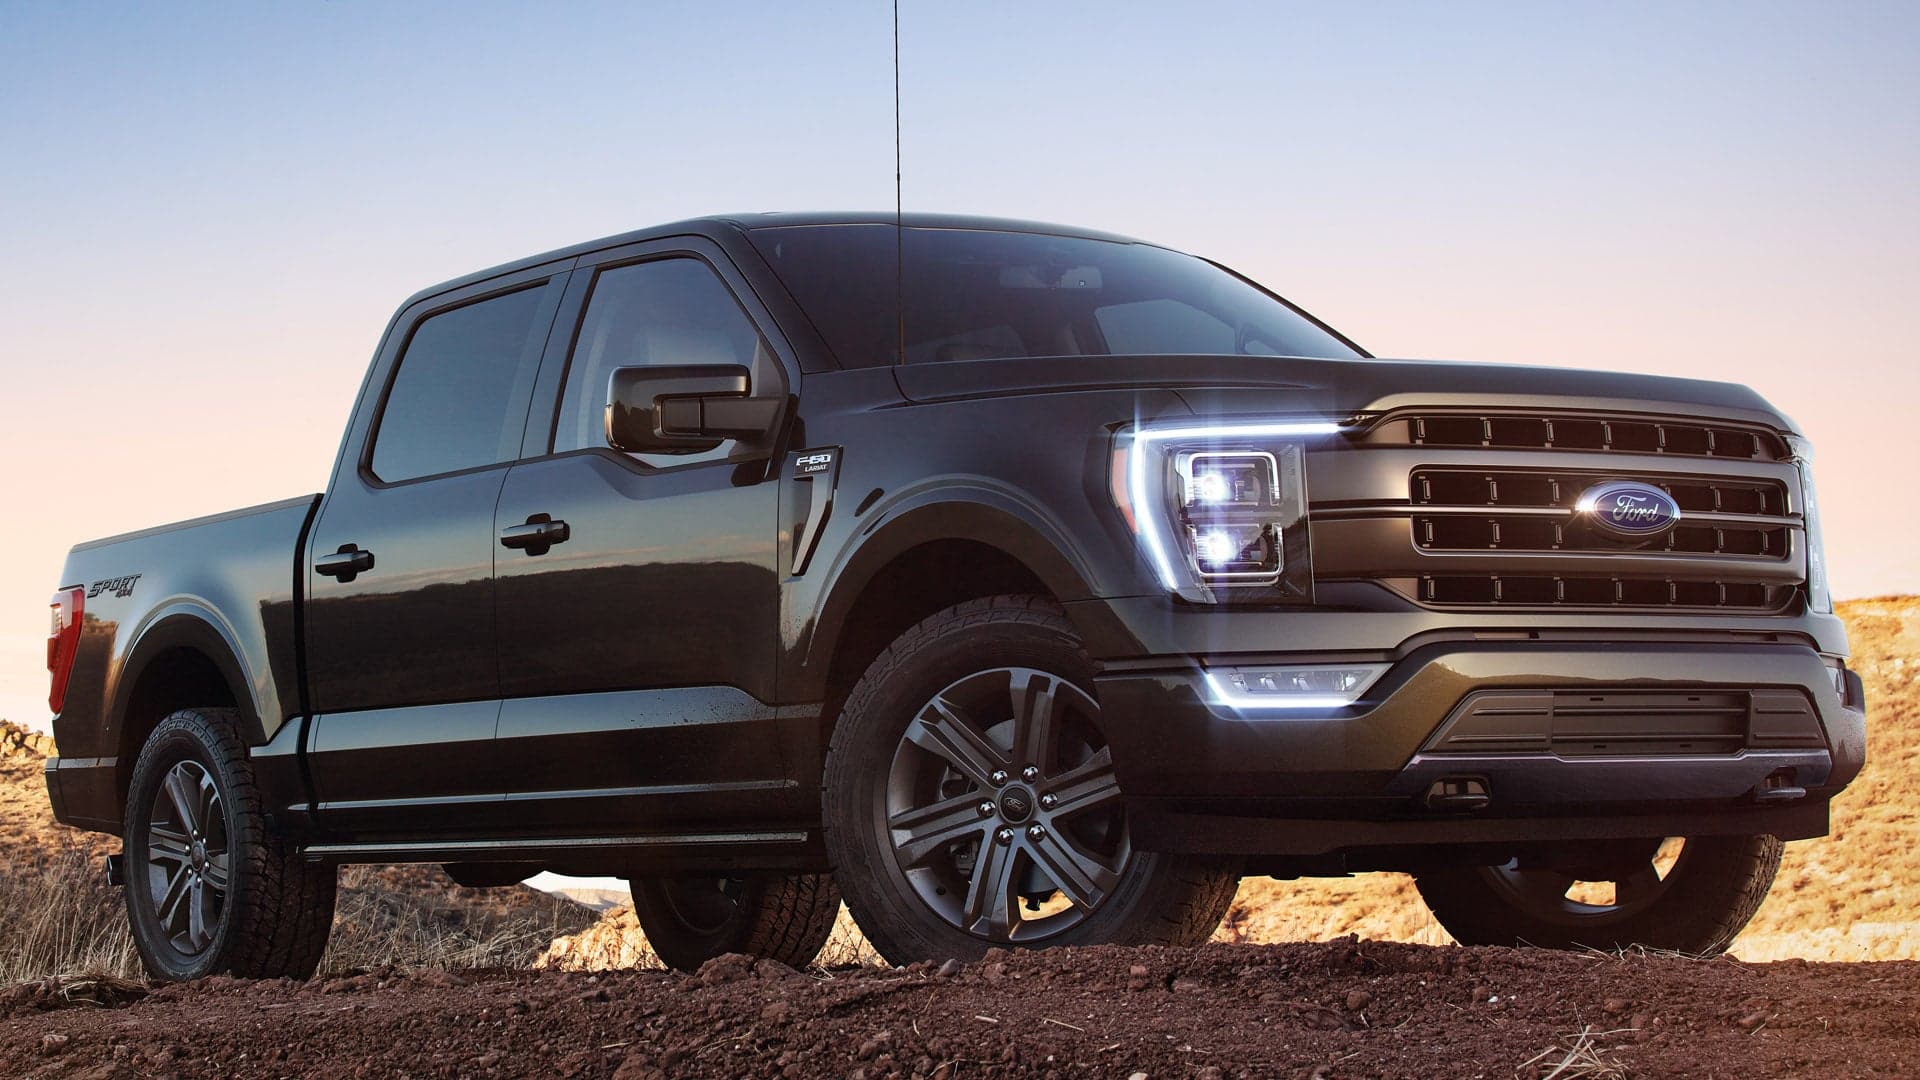 Partially Finished Ford F-150s Are Being Held After the Assembly Line Due to Chip Shortage